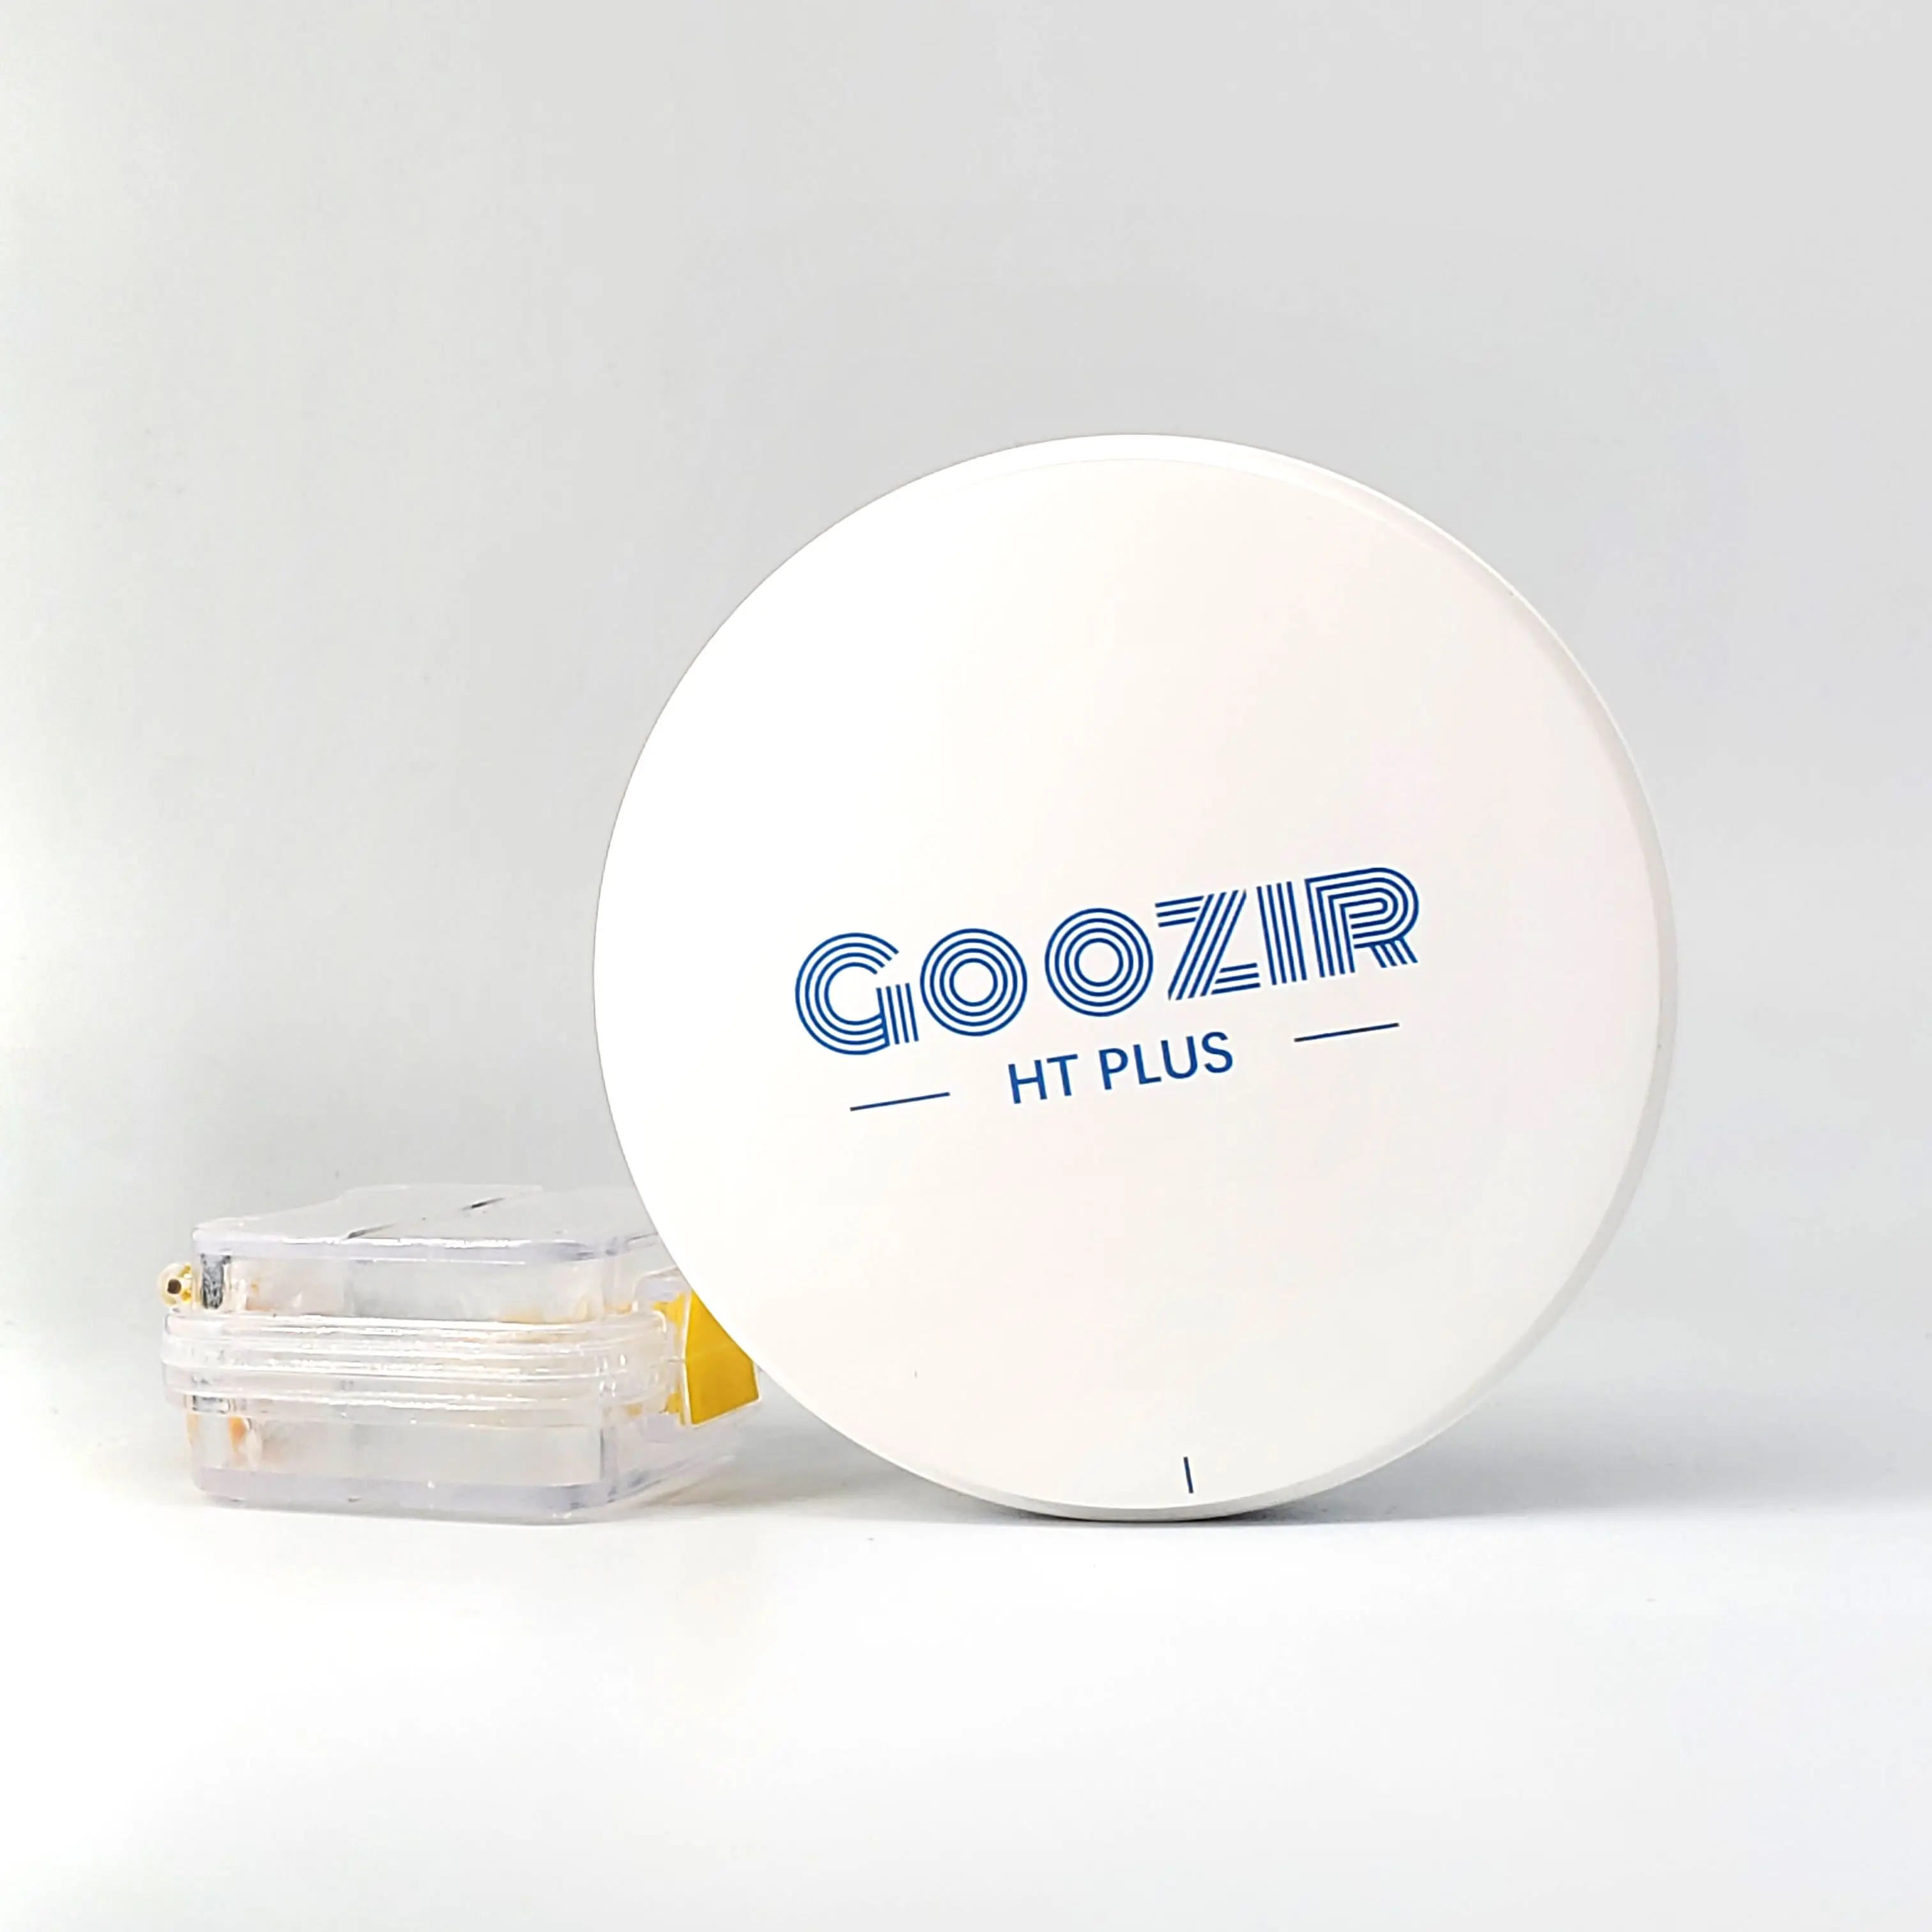 

GOOZIR 98mm Open System Cad Cam Milling Materials High Quality HT white A2 With 1200Mpa Dental Zirconia blank For Lab or Clinic